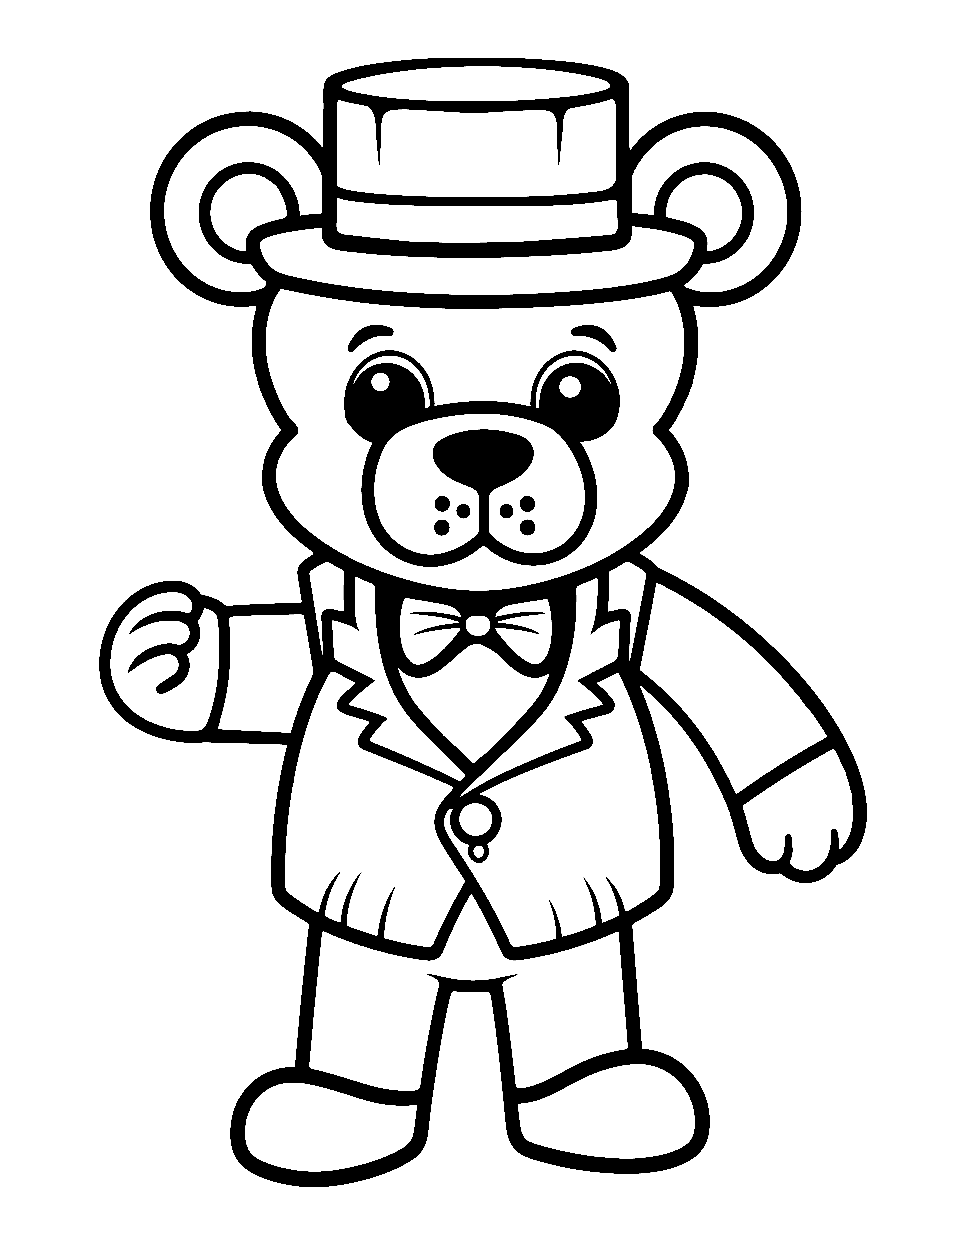 Cool Kawaii Freddy Coloring Page - Freddy looking cool and kawaii with a simple background.